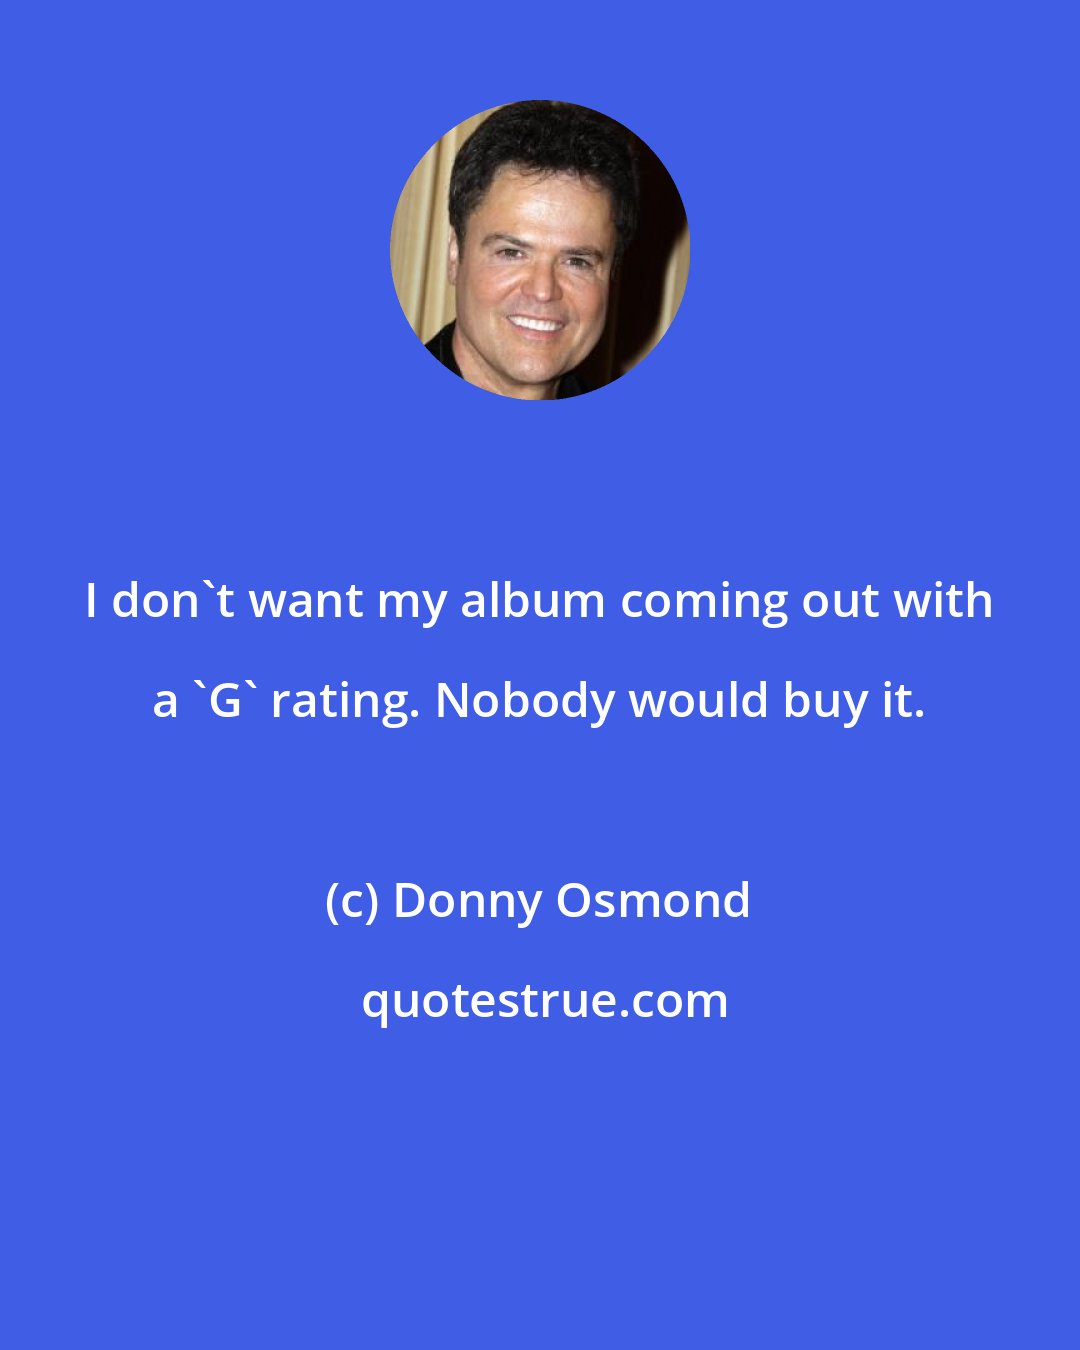 Donny Osmond: I don't want my album coming out with a 'G' rating. Nobody would buy it.